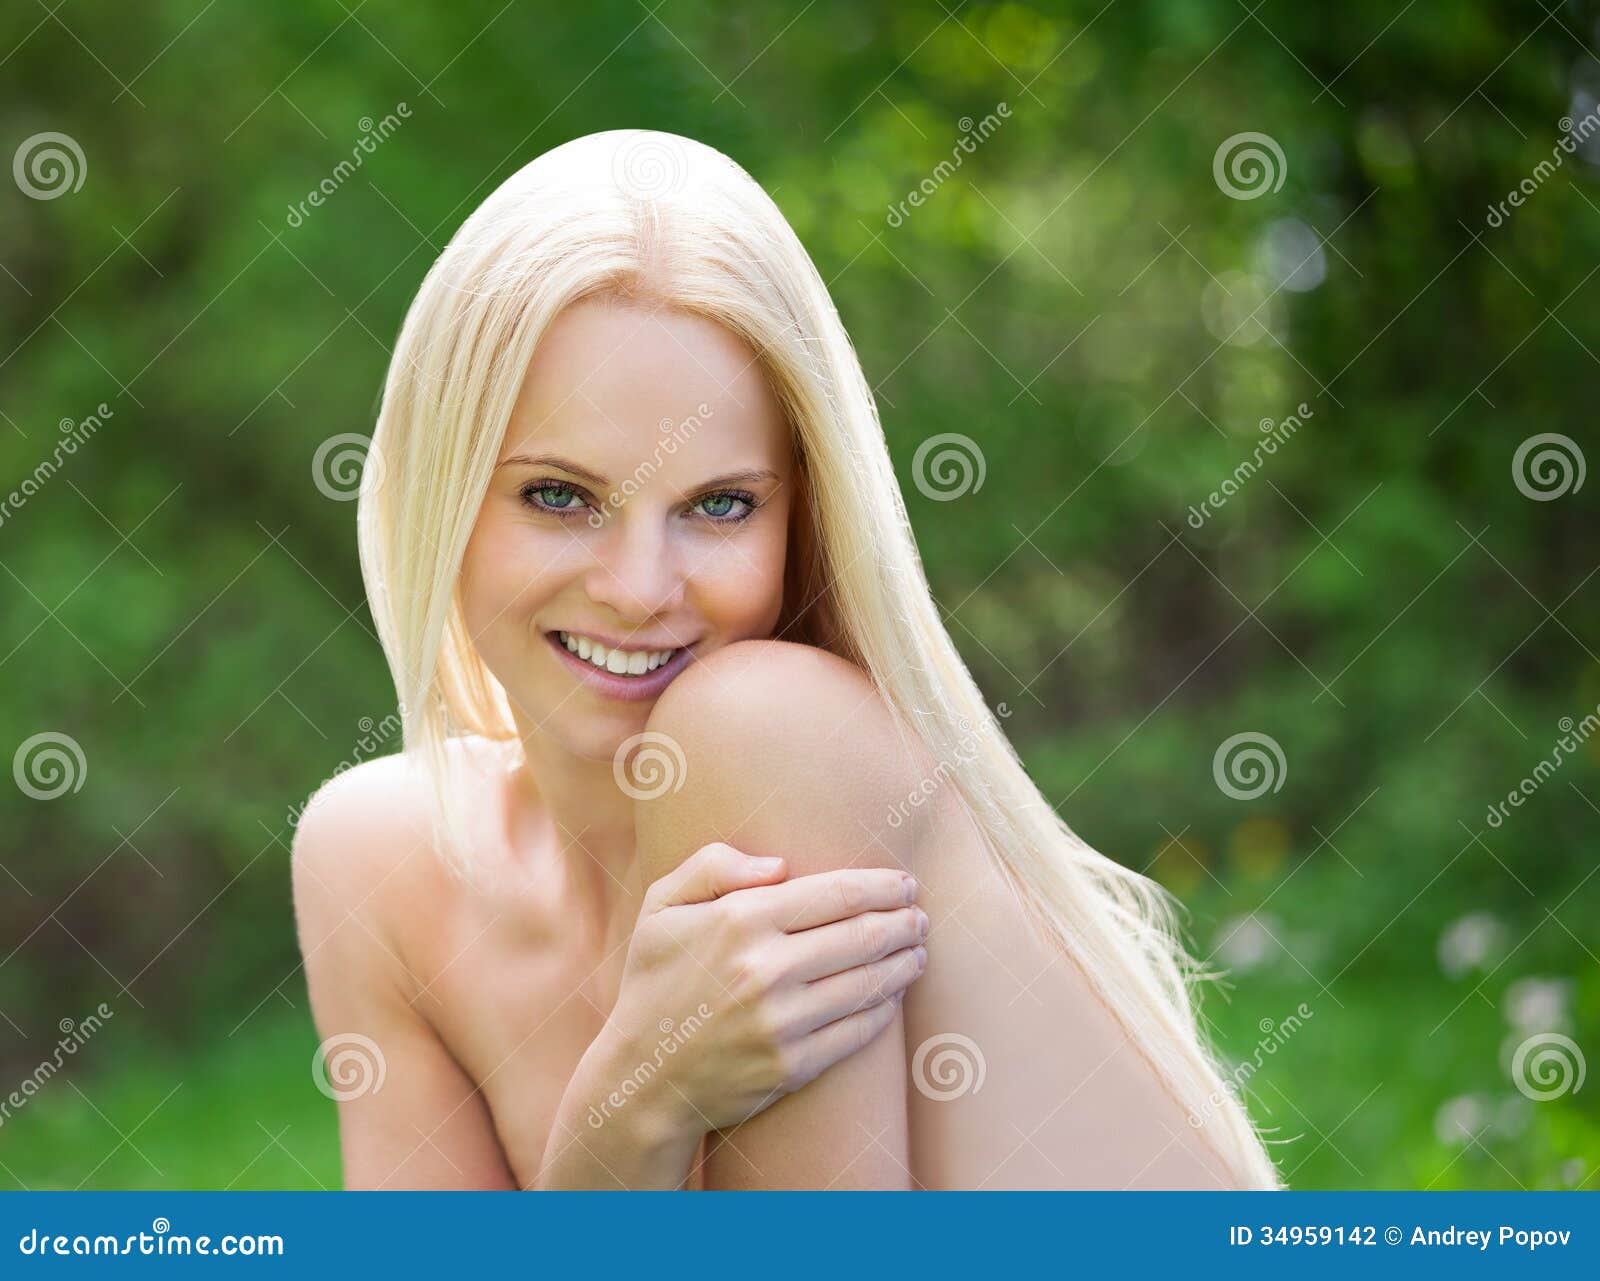 Young Topless Woman in Nature Stock Photo - of leisure, hand: 34959142